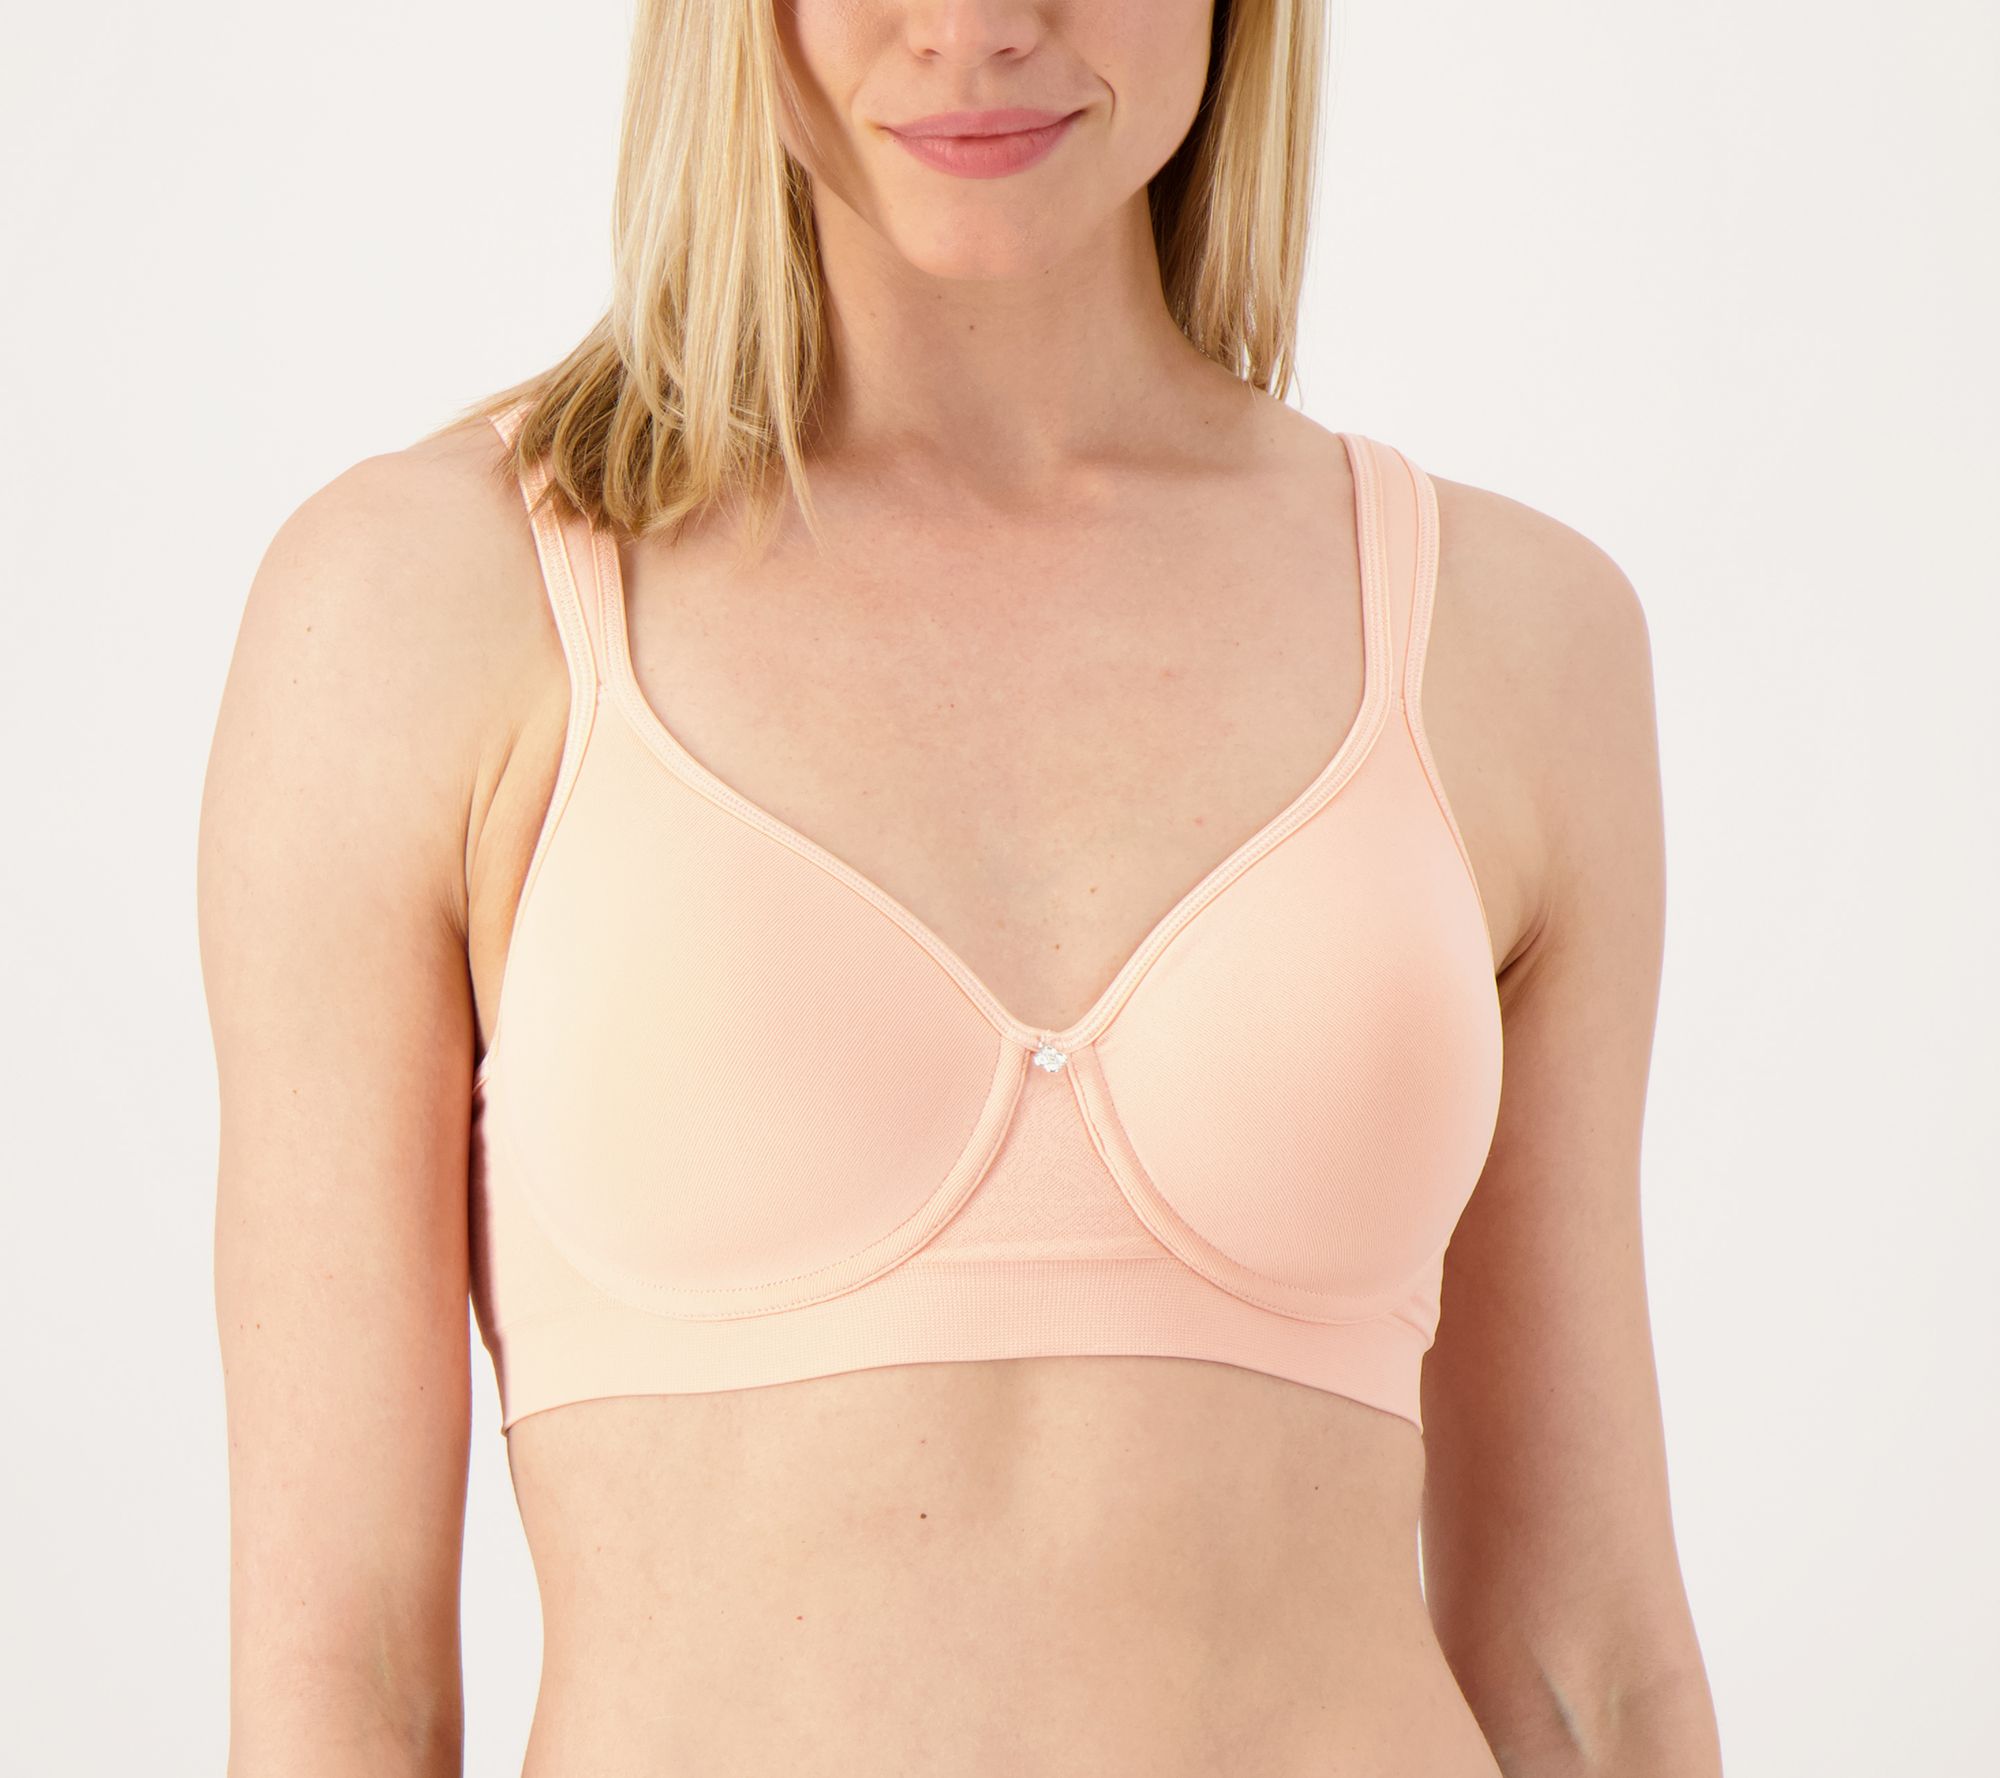 Breezies Lace Unlined Underwire Support Bra - QVC.com